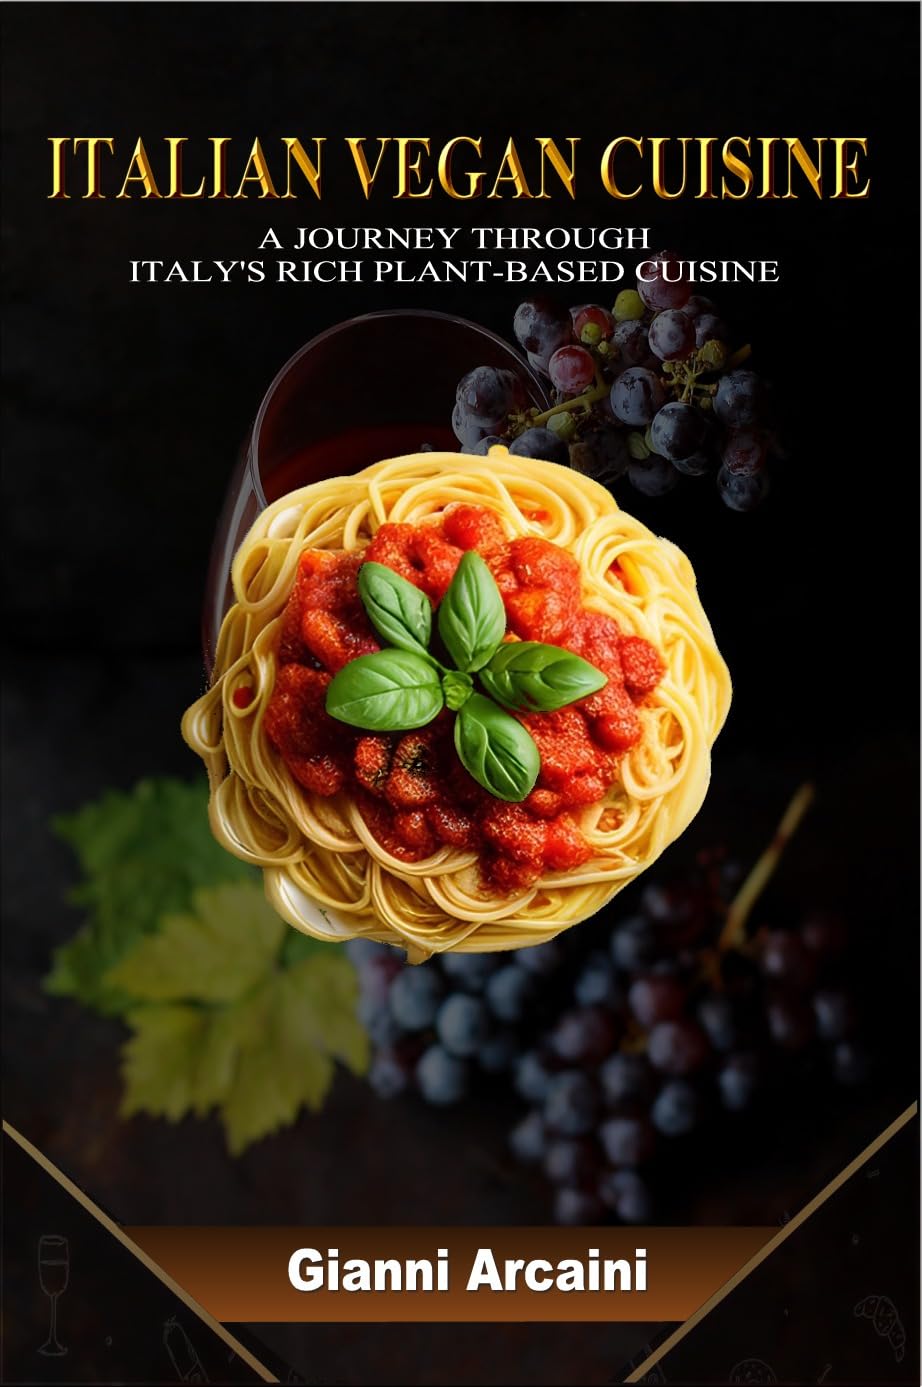 ITALIAN VEGAN CUISINE: A JOURNEY THROUGH ITALY'S RICH PLANT-BASED CUISINE (Become a Master of Italian Cooking, a Gastronomic Journey Through the Heart of Italian Cuisine Book 2)